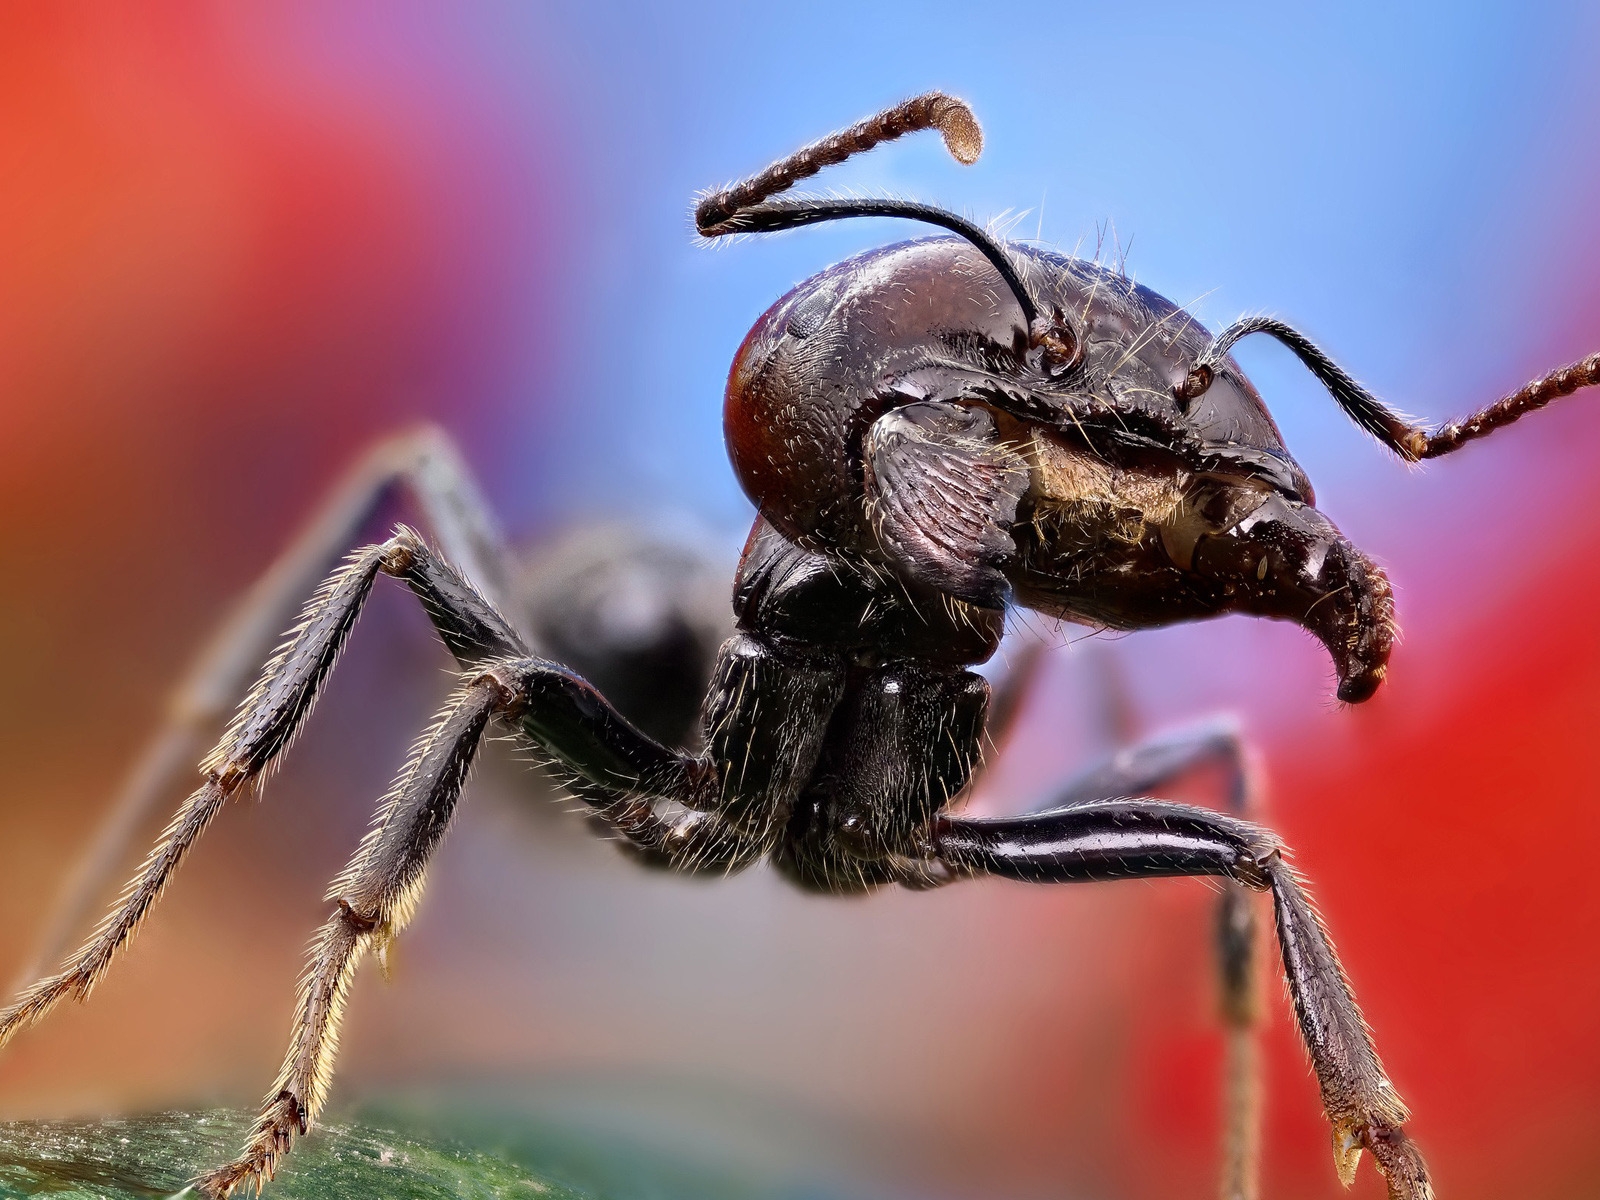 Ant Close Up for 1600 x 1200 resolution